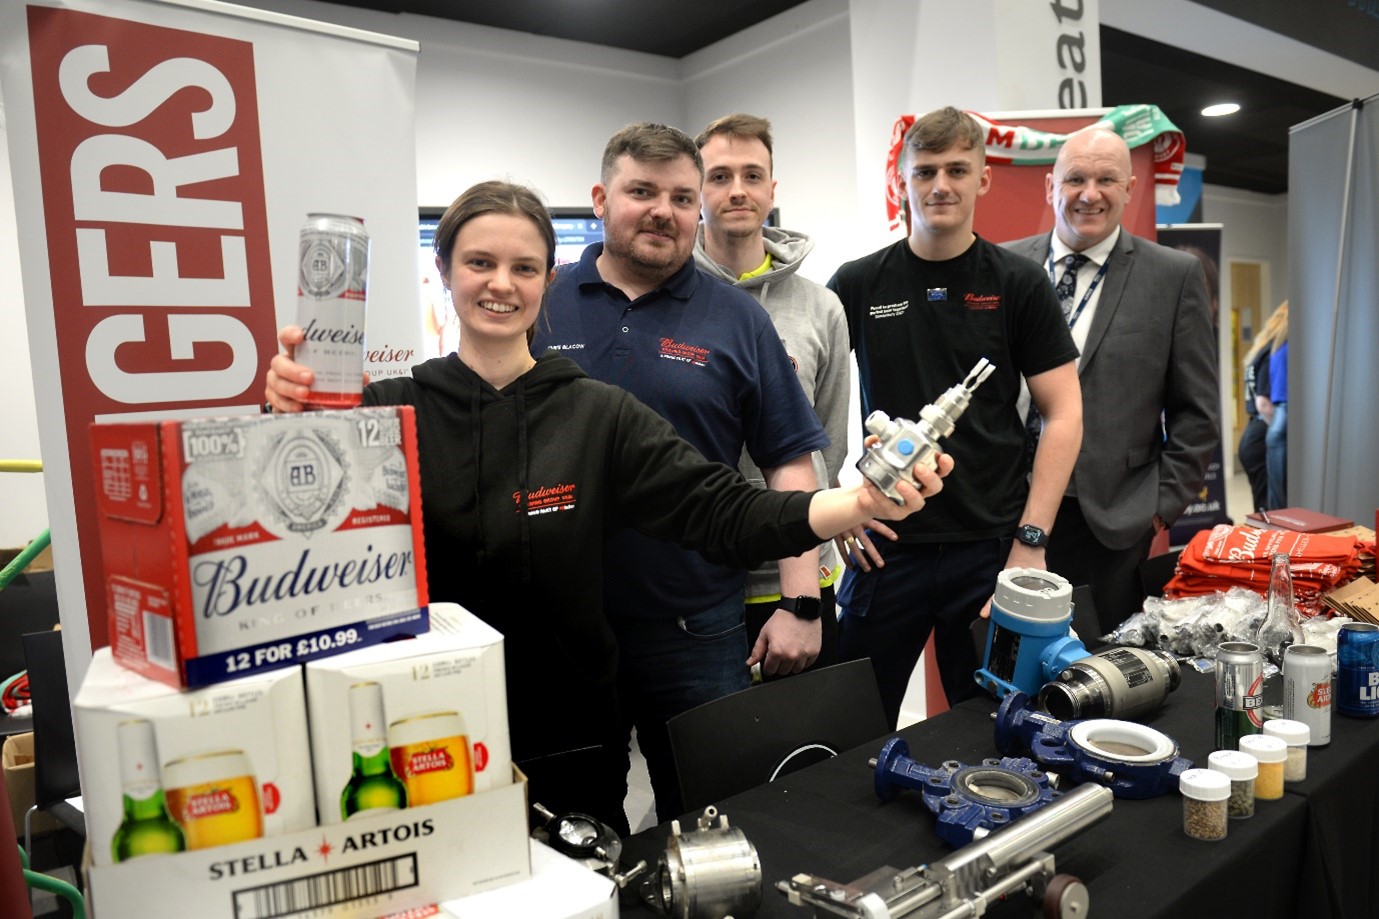 Budweiser Celebrating their Partnership with Themis at Burnley College